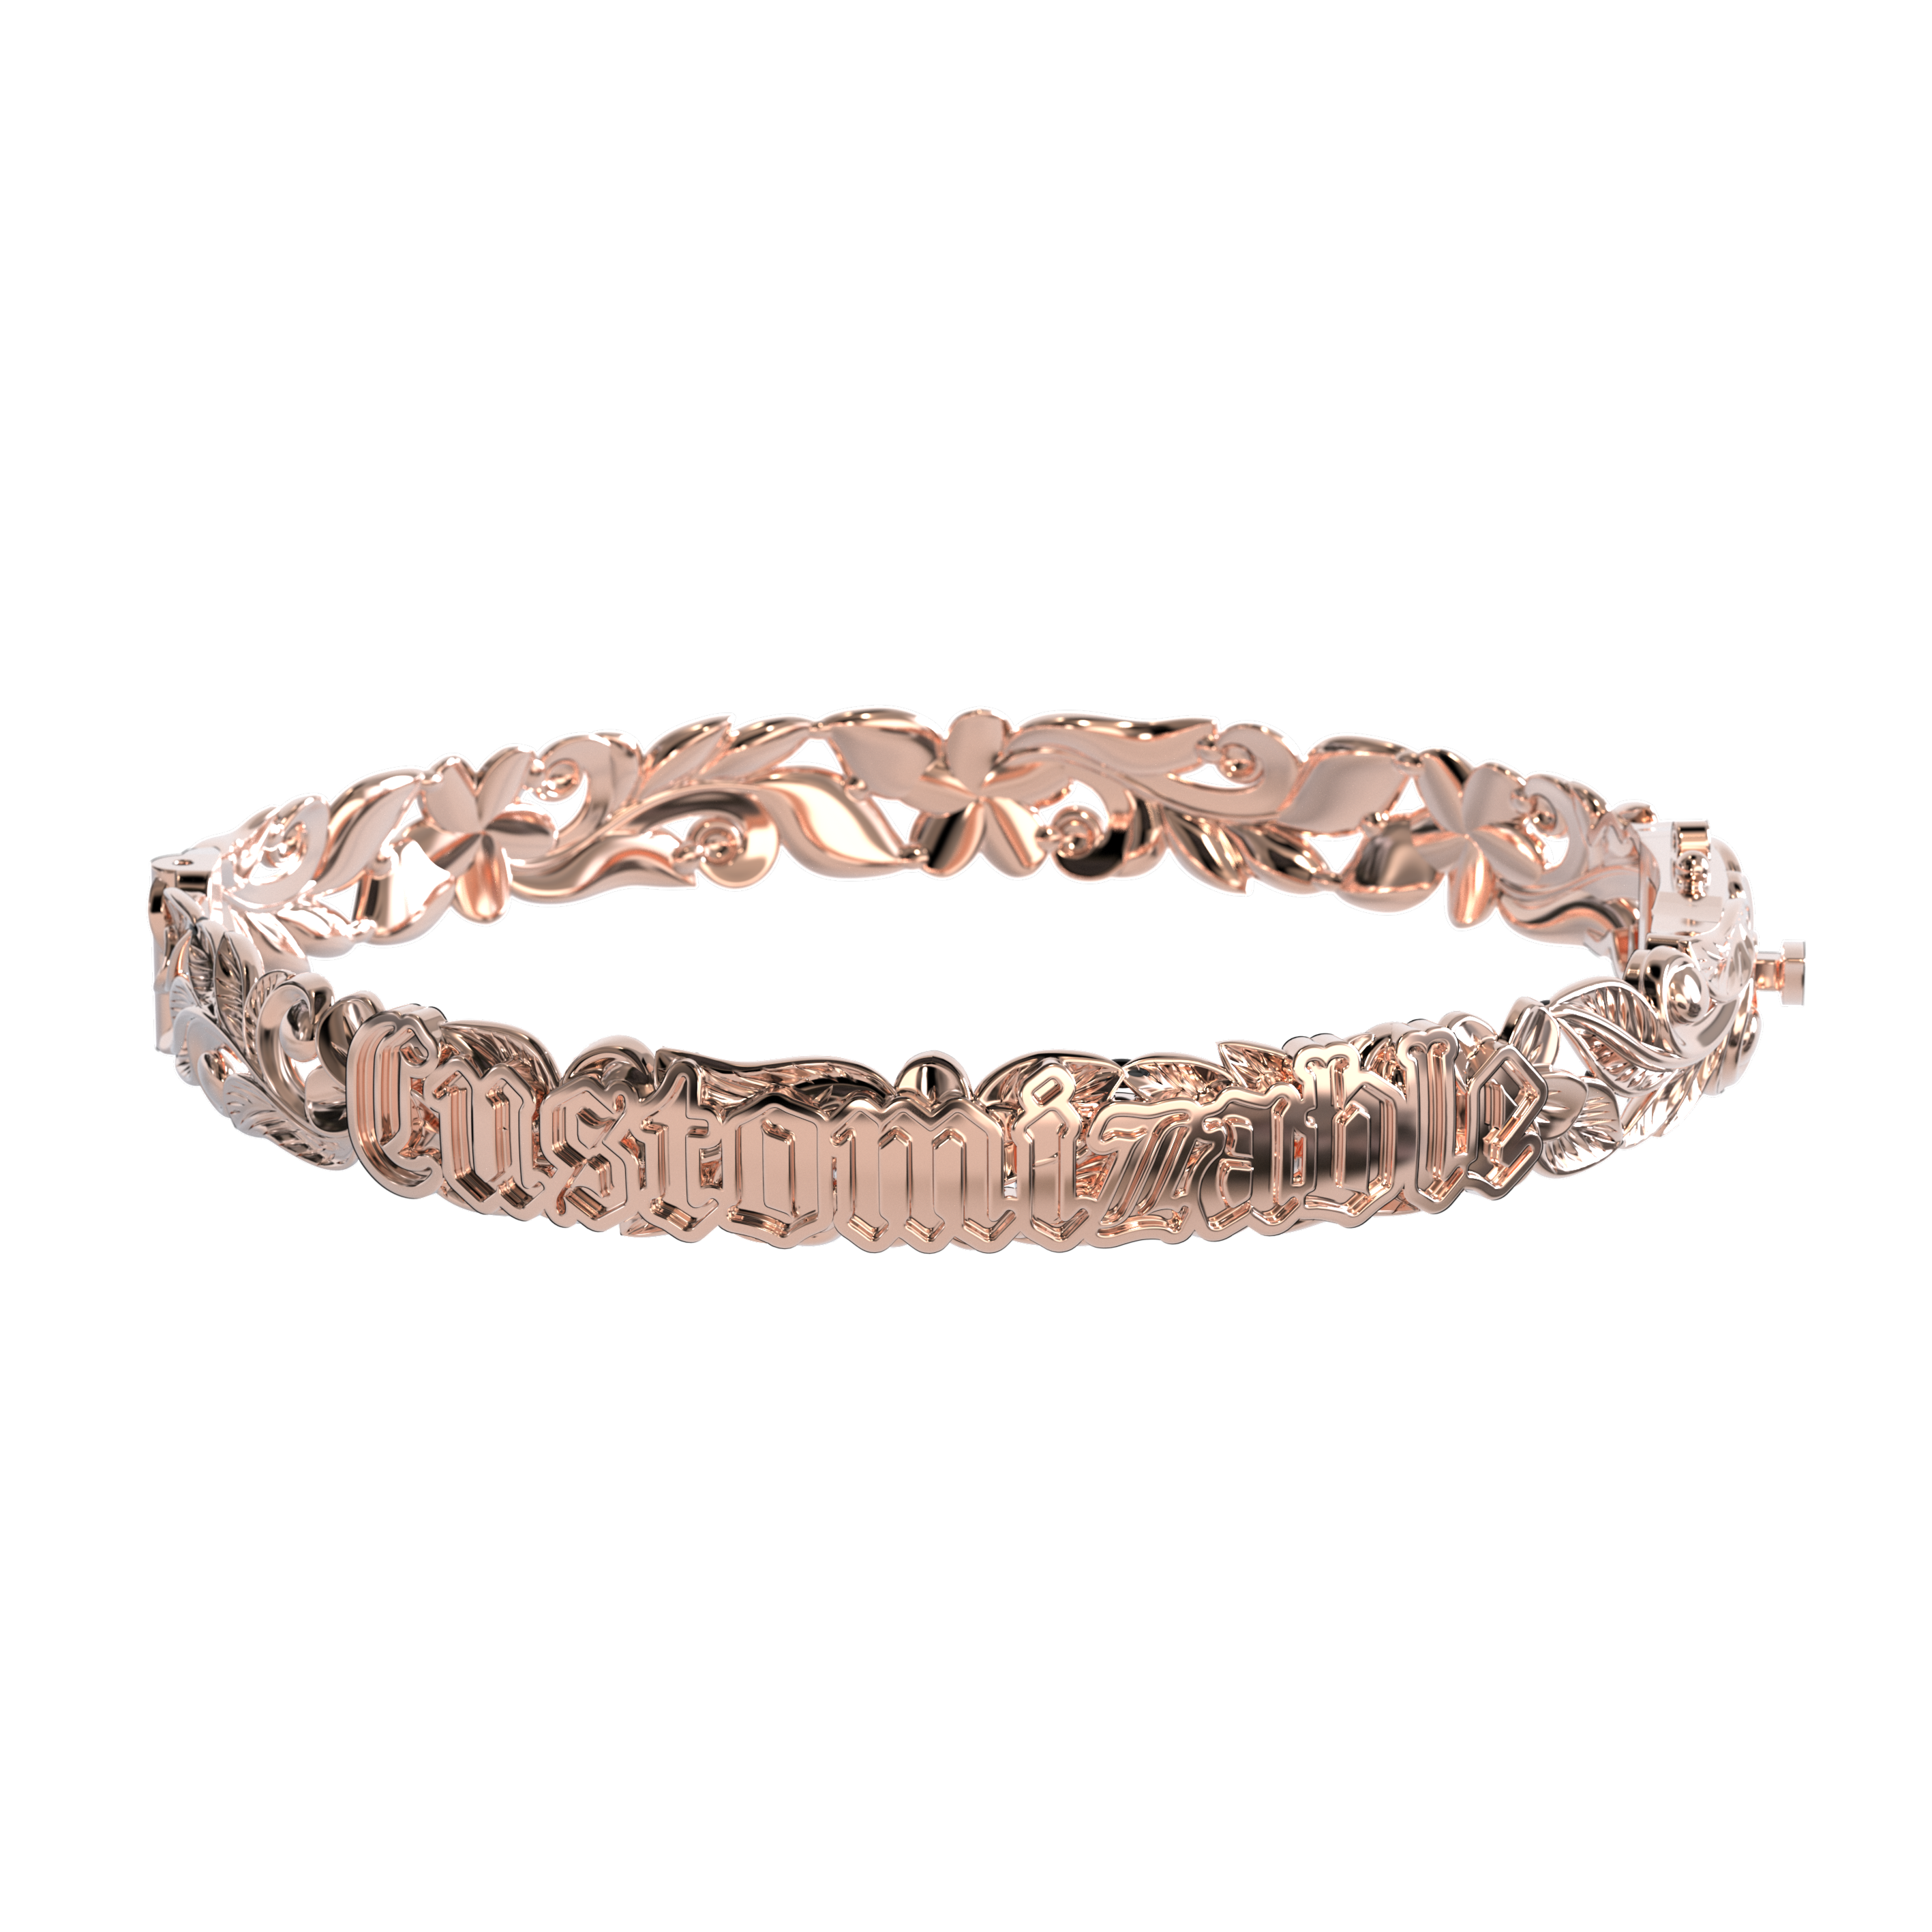 8mm Customizable Hawaiian Hinge Bracelet with Raised Lettering in Rose Gold